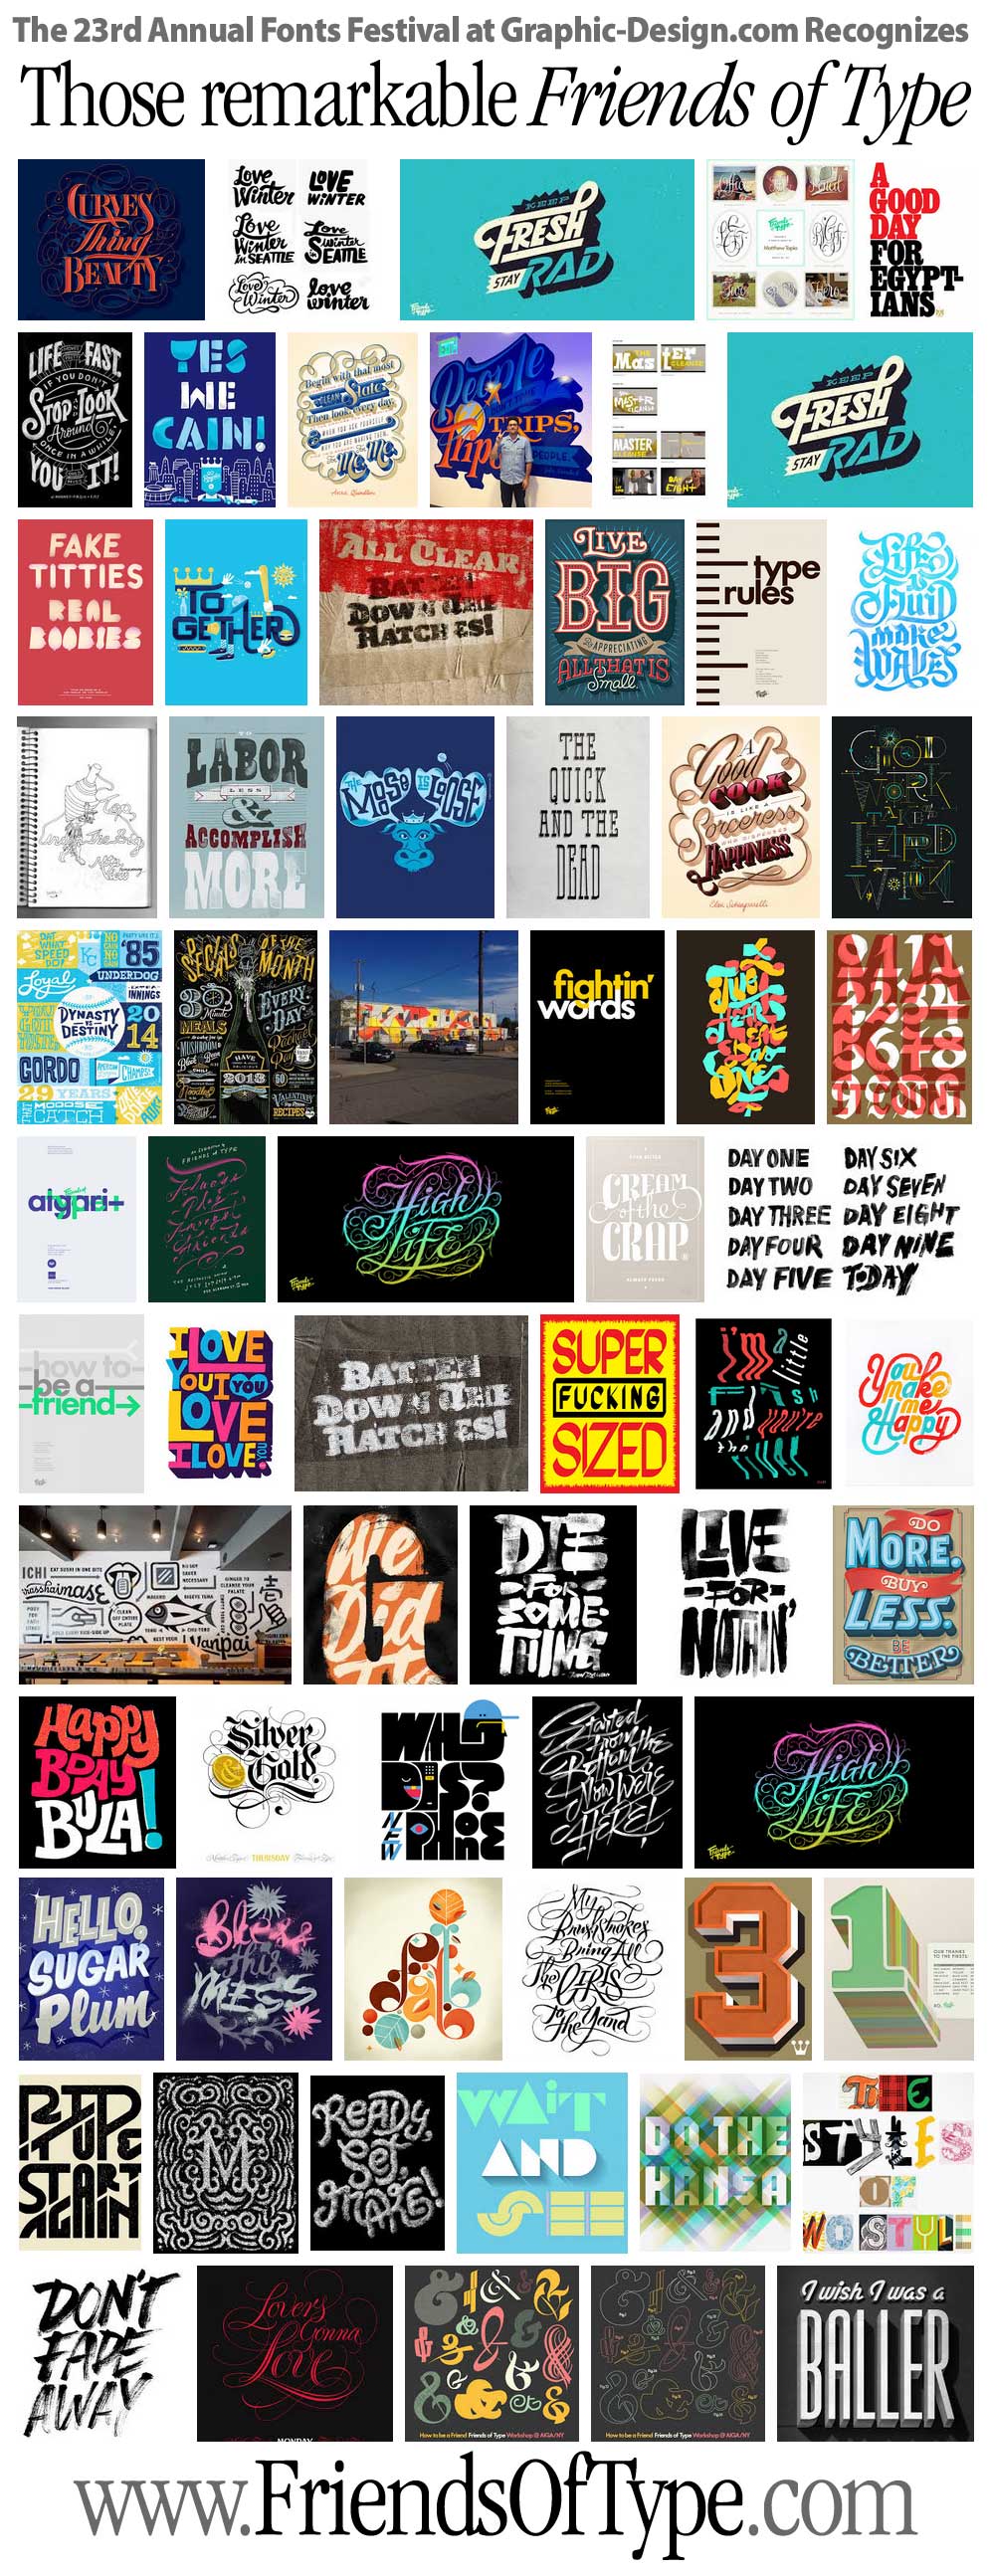 click here for friends of typography